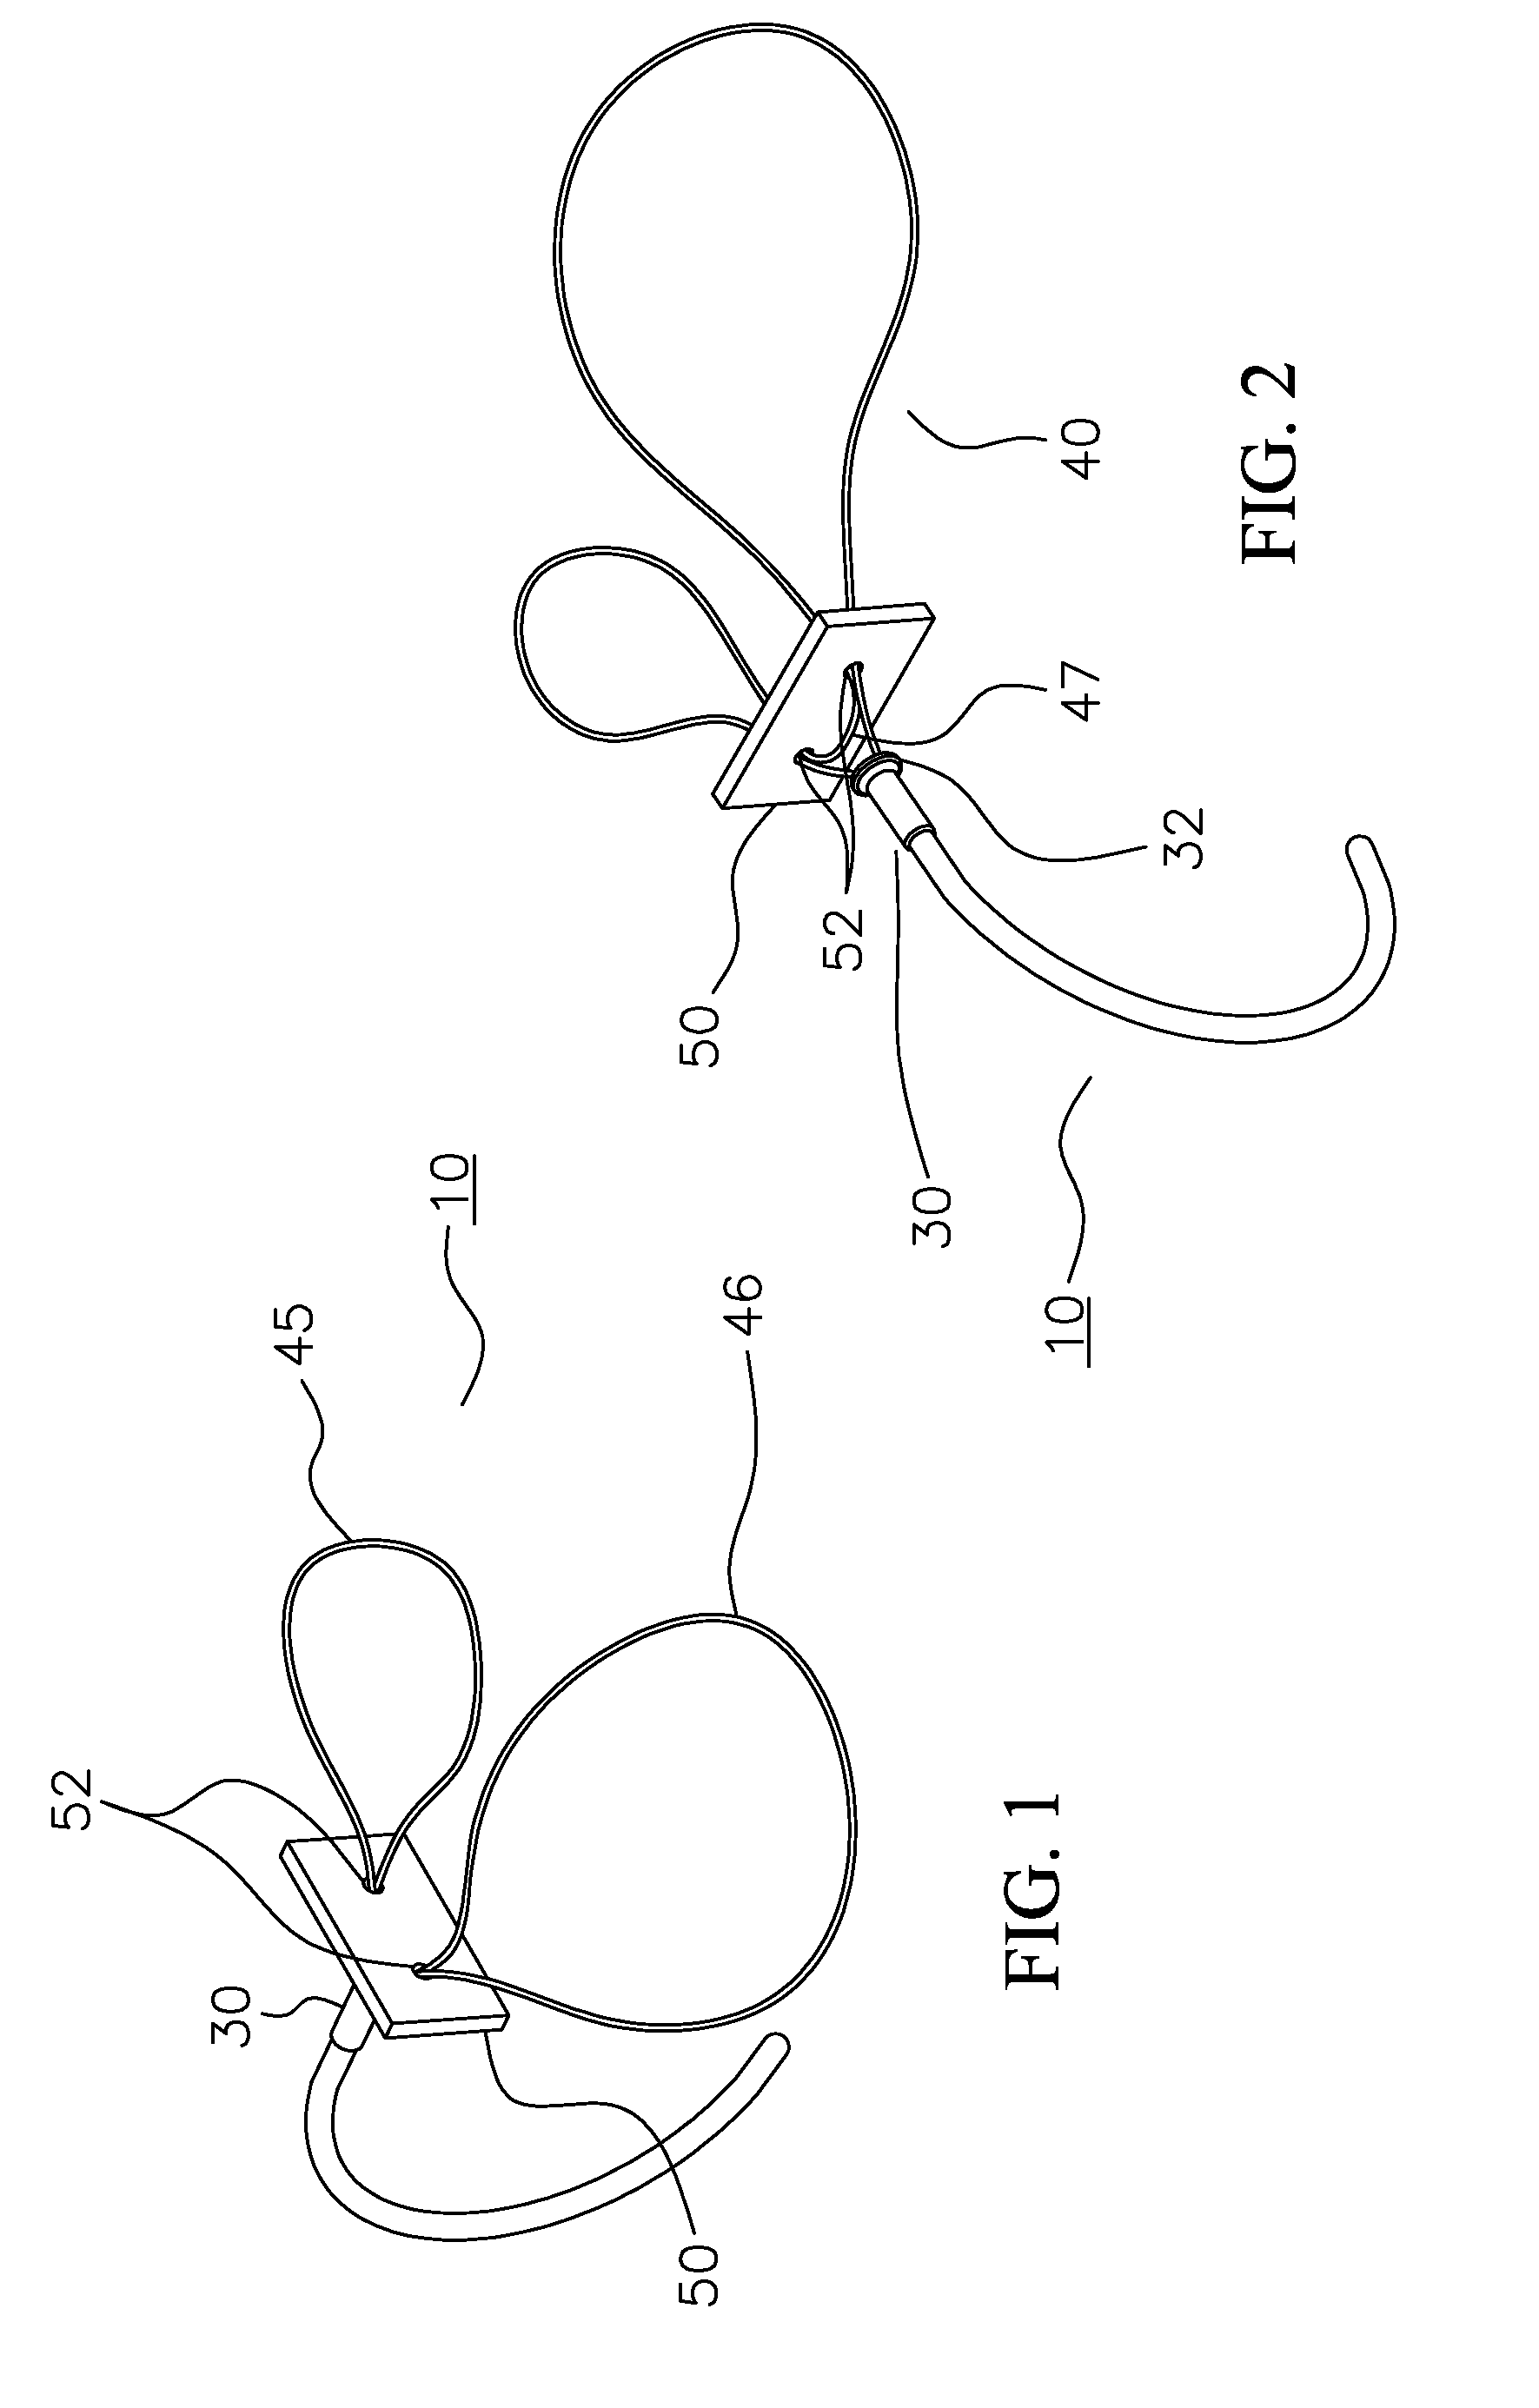 Multiple loop device for passing suture tails through a surgical pledget